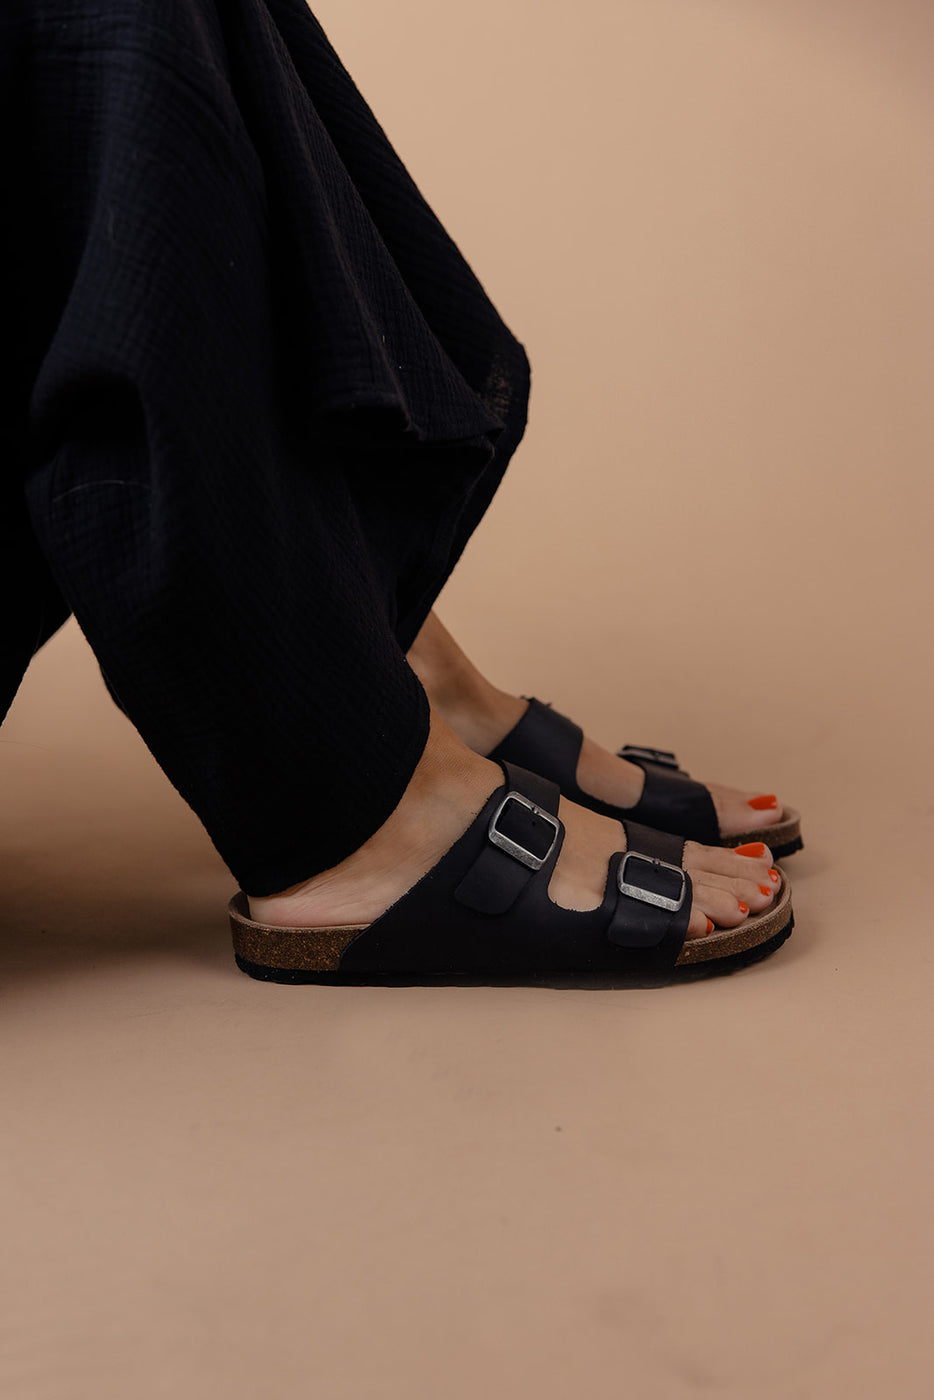 a person's feet with sandals